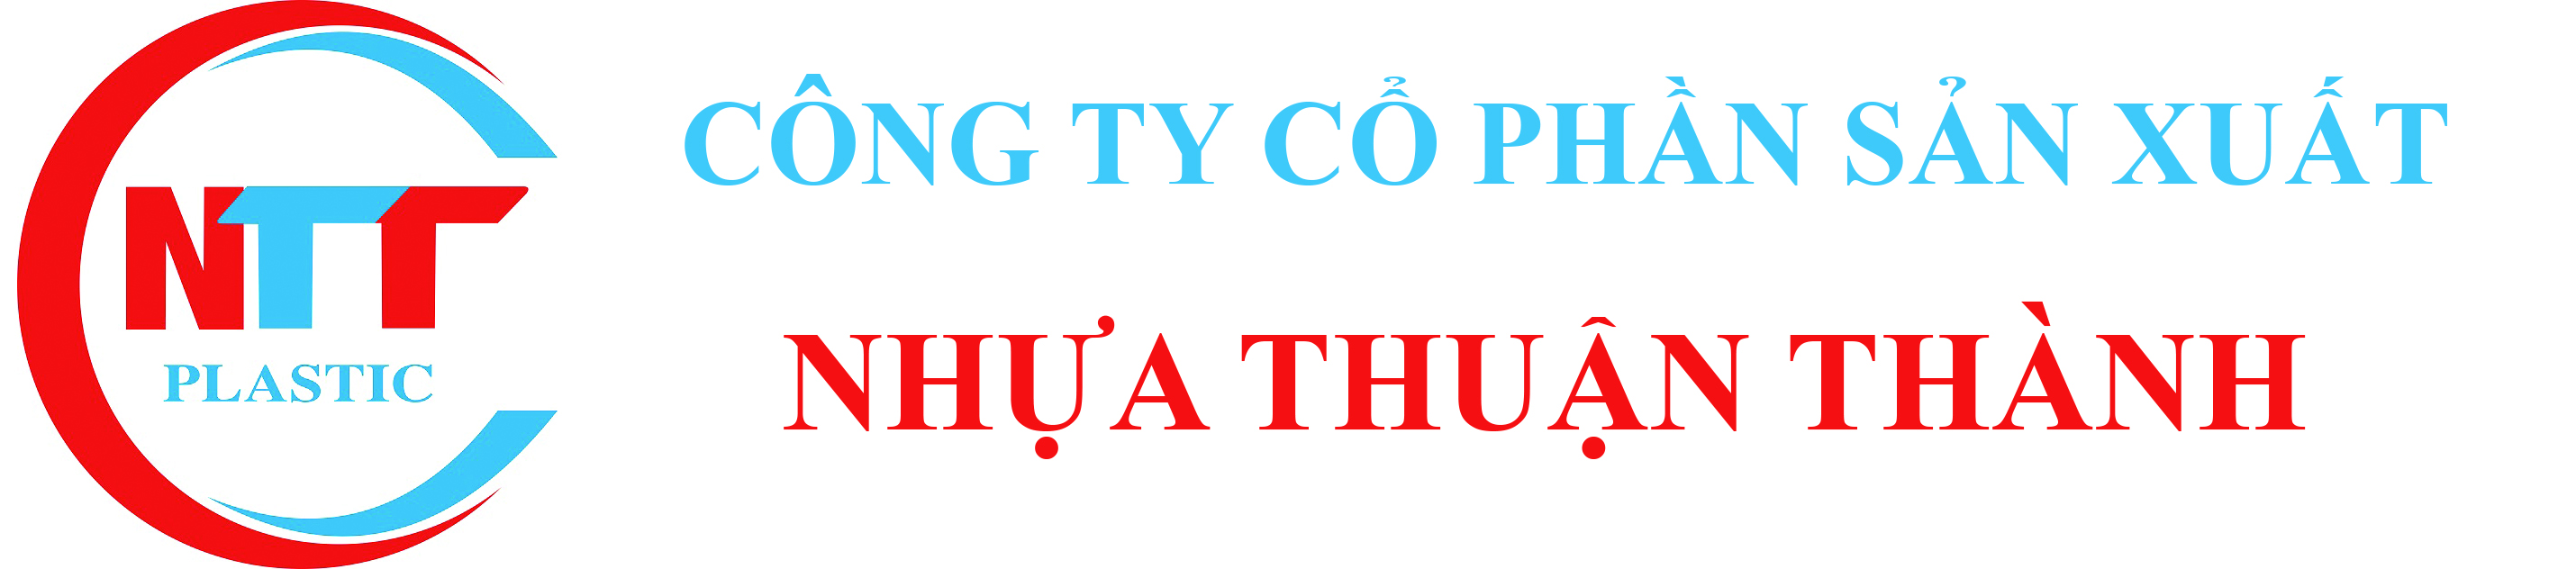 THUAN THANH PLASTIC PRODUCTION JOINT STOCK COMPANY